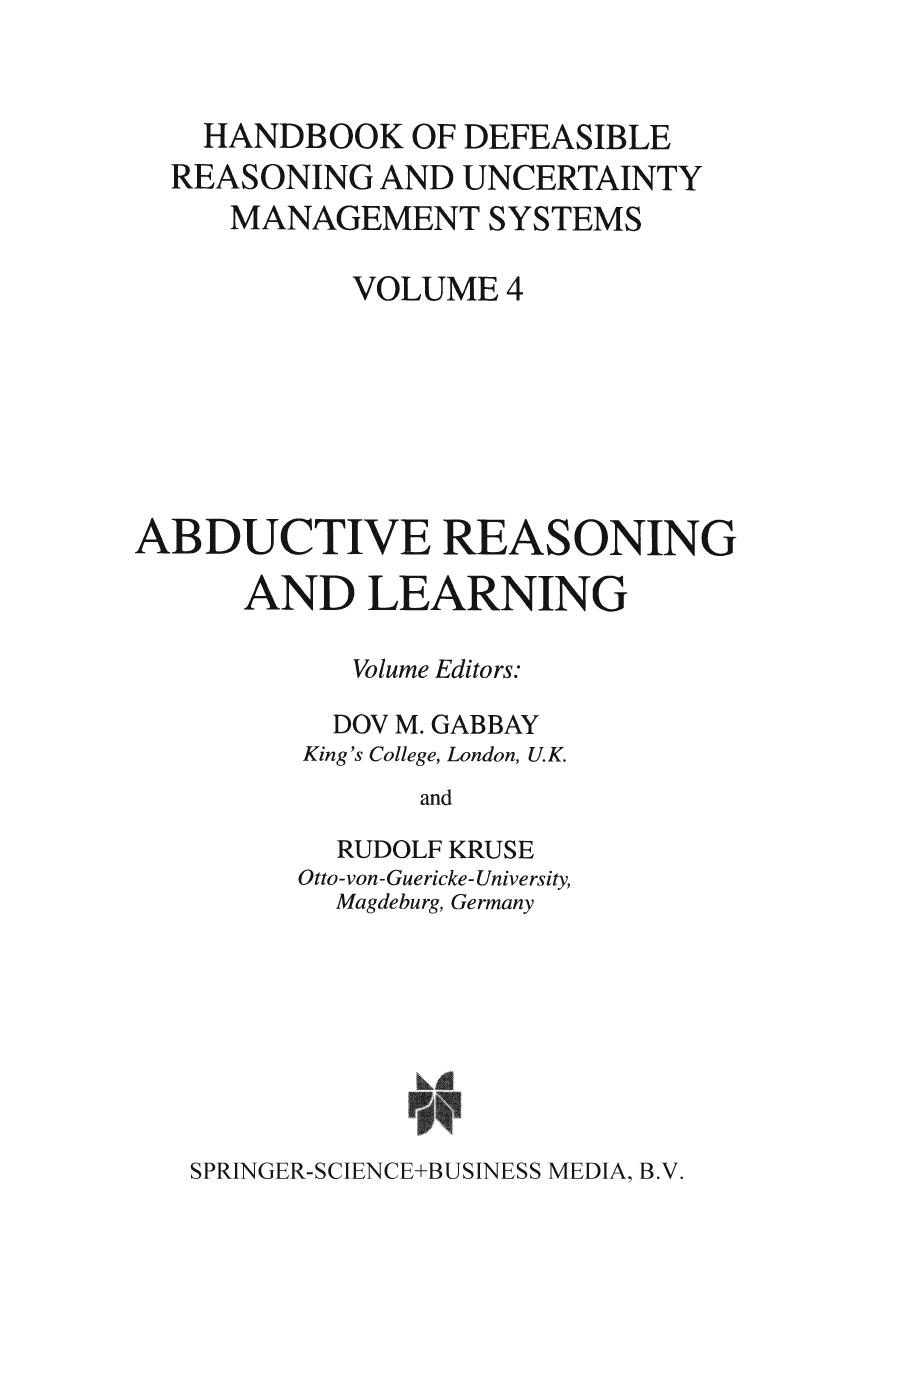 Abductive Reasoning and Learning